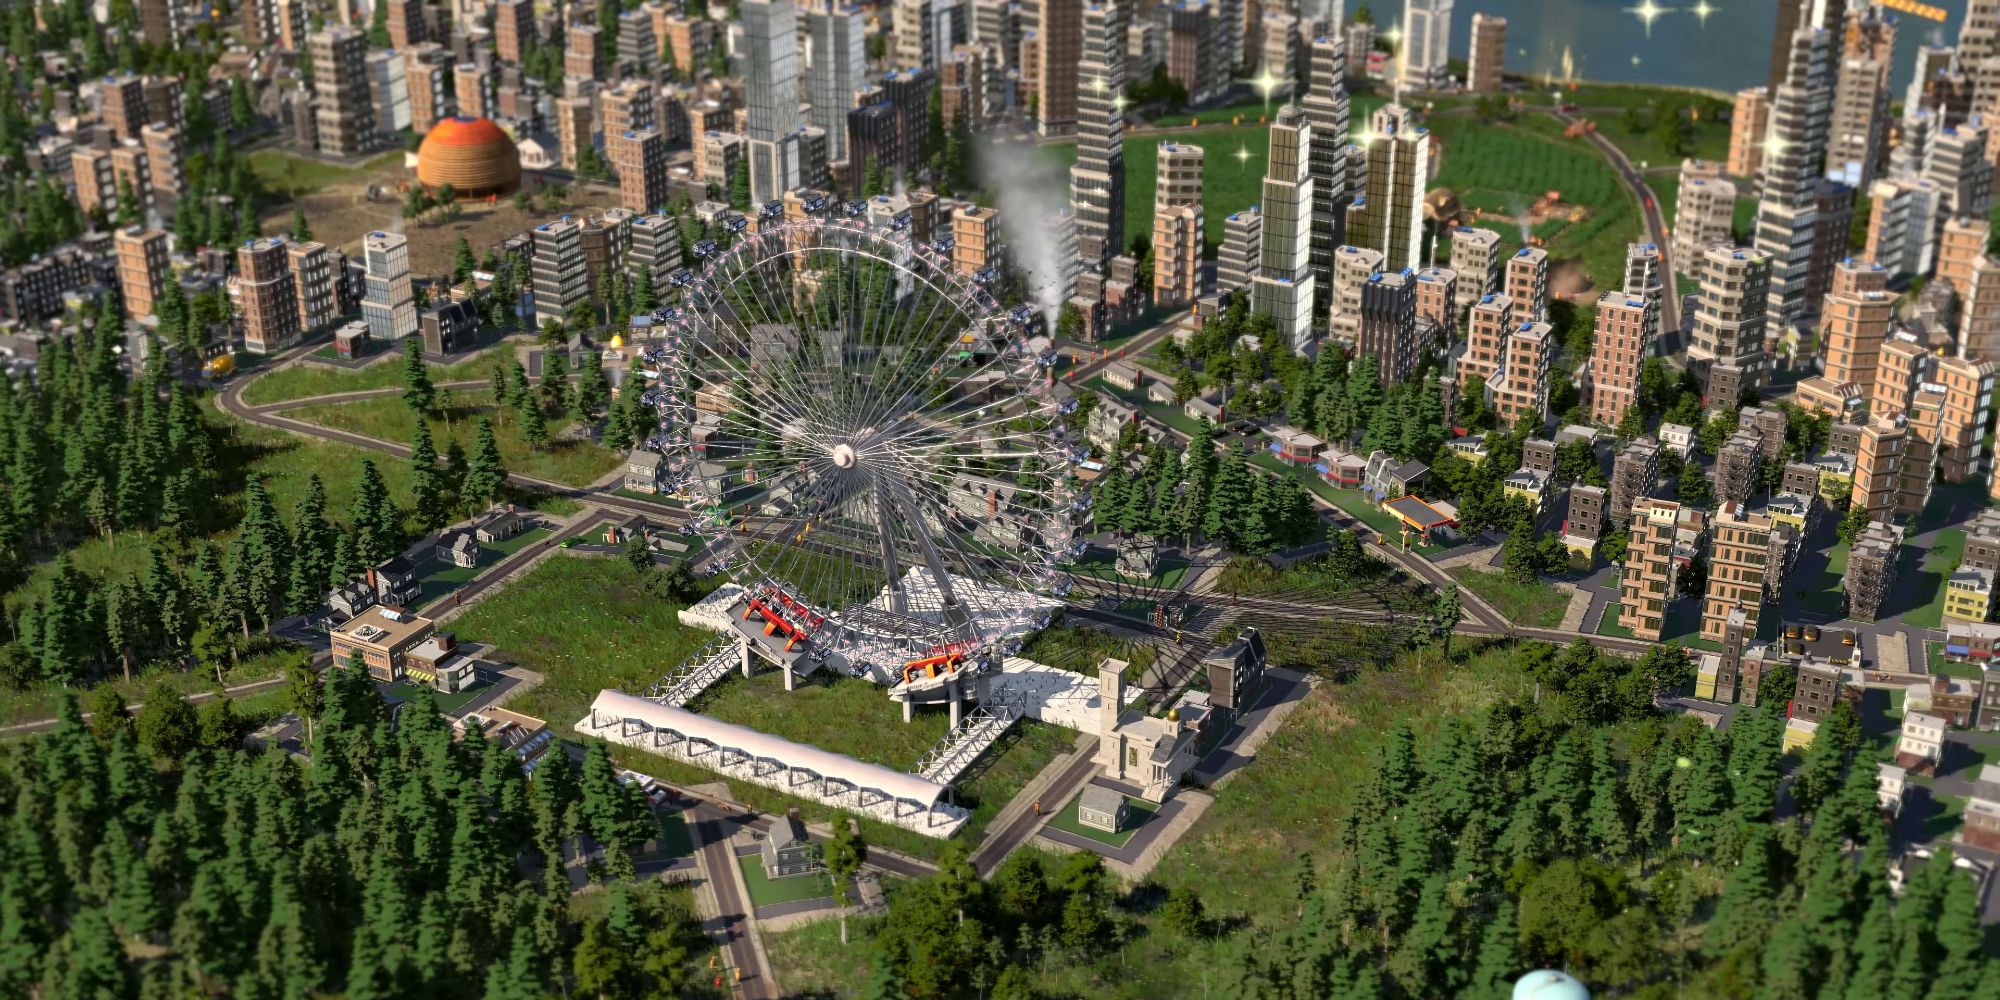 An aerial view of a city builder, showing high-rise buildings and a large ferris wheel on the edge of a pine forest, in a screenshot from Ara: History Untold.